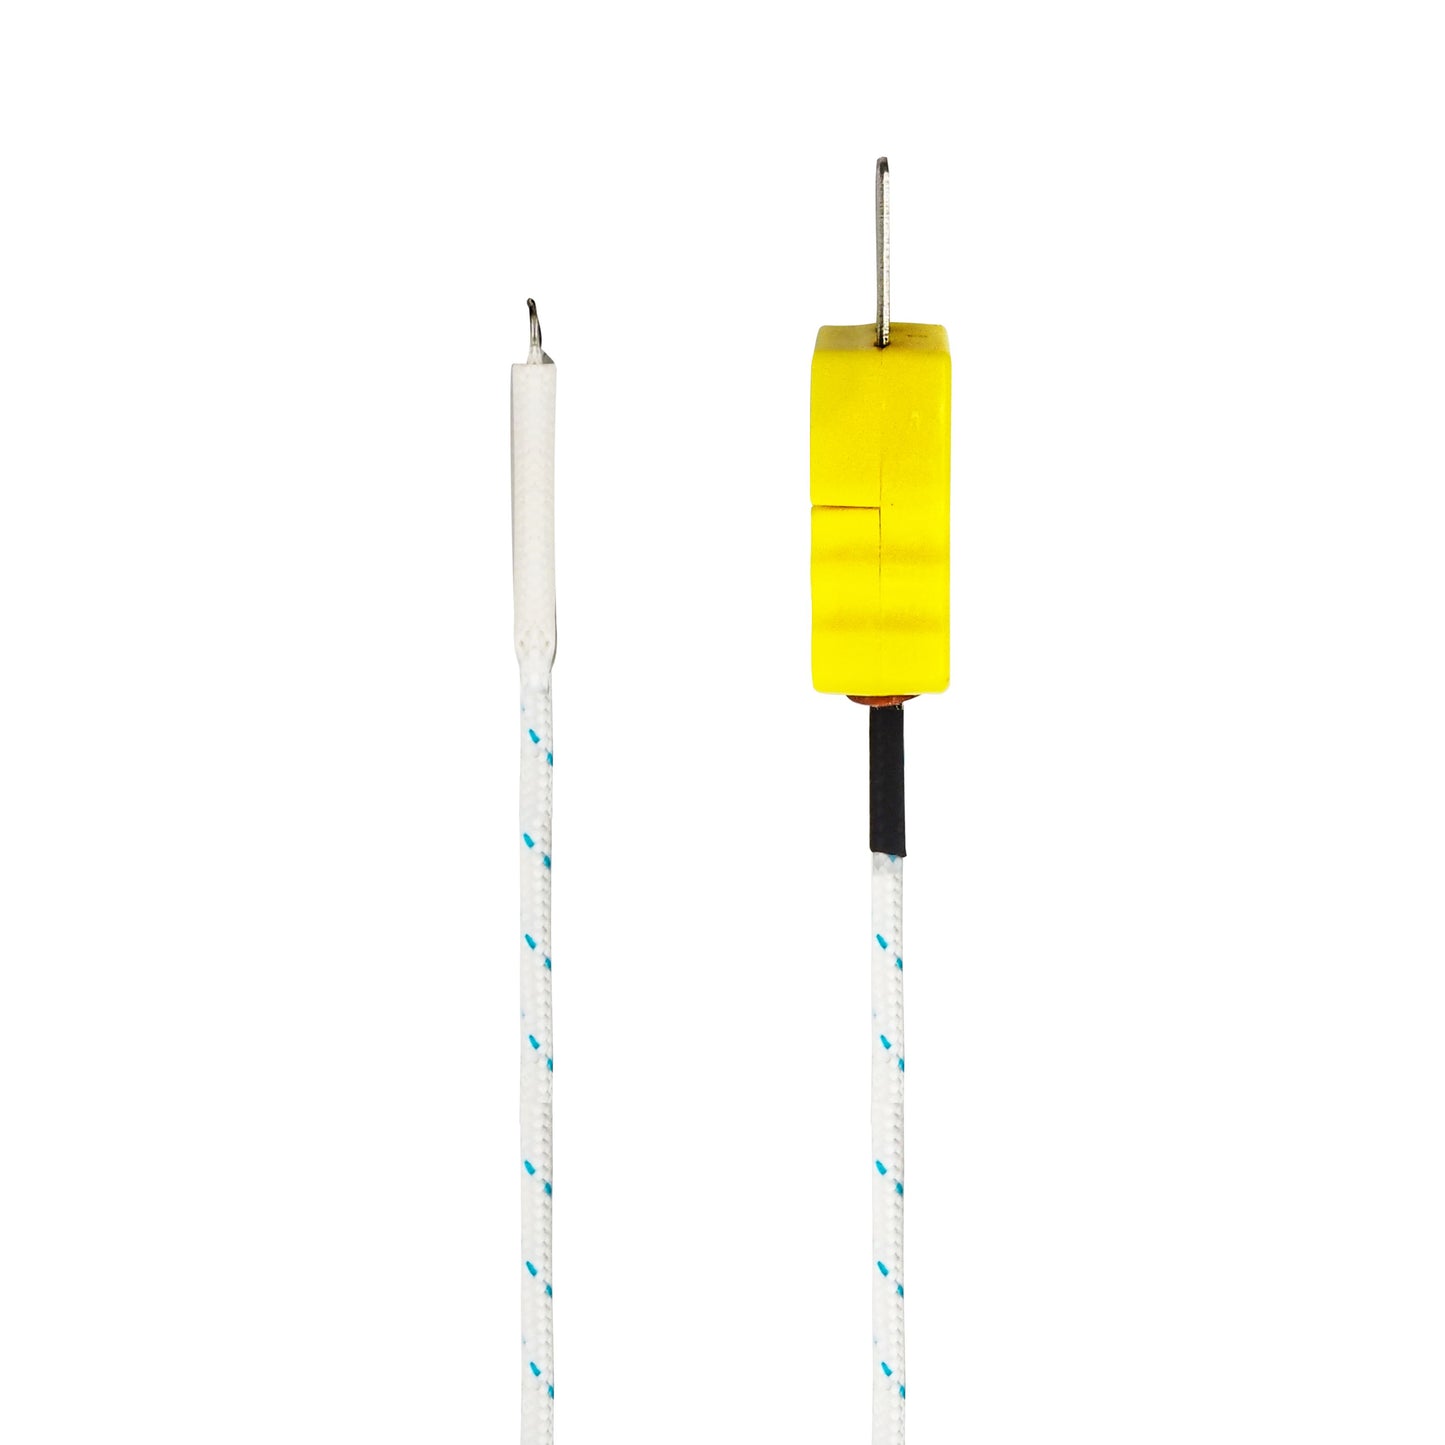 K- type probe for thermometer and thermocouple lined up